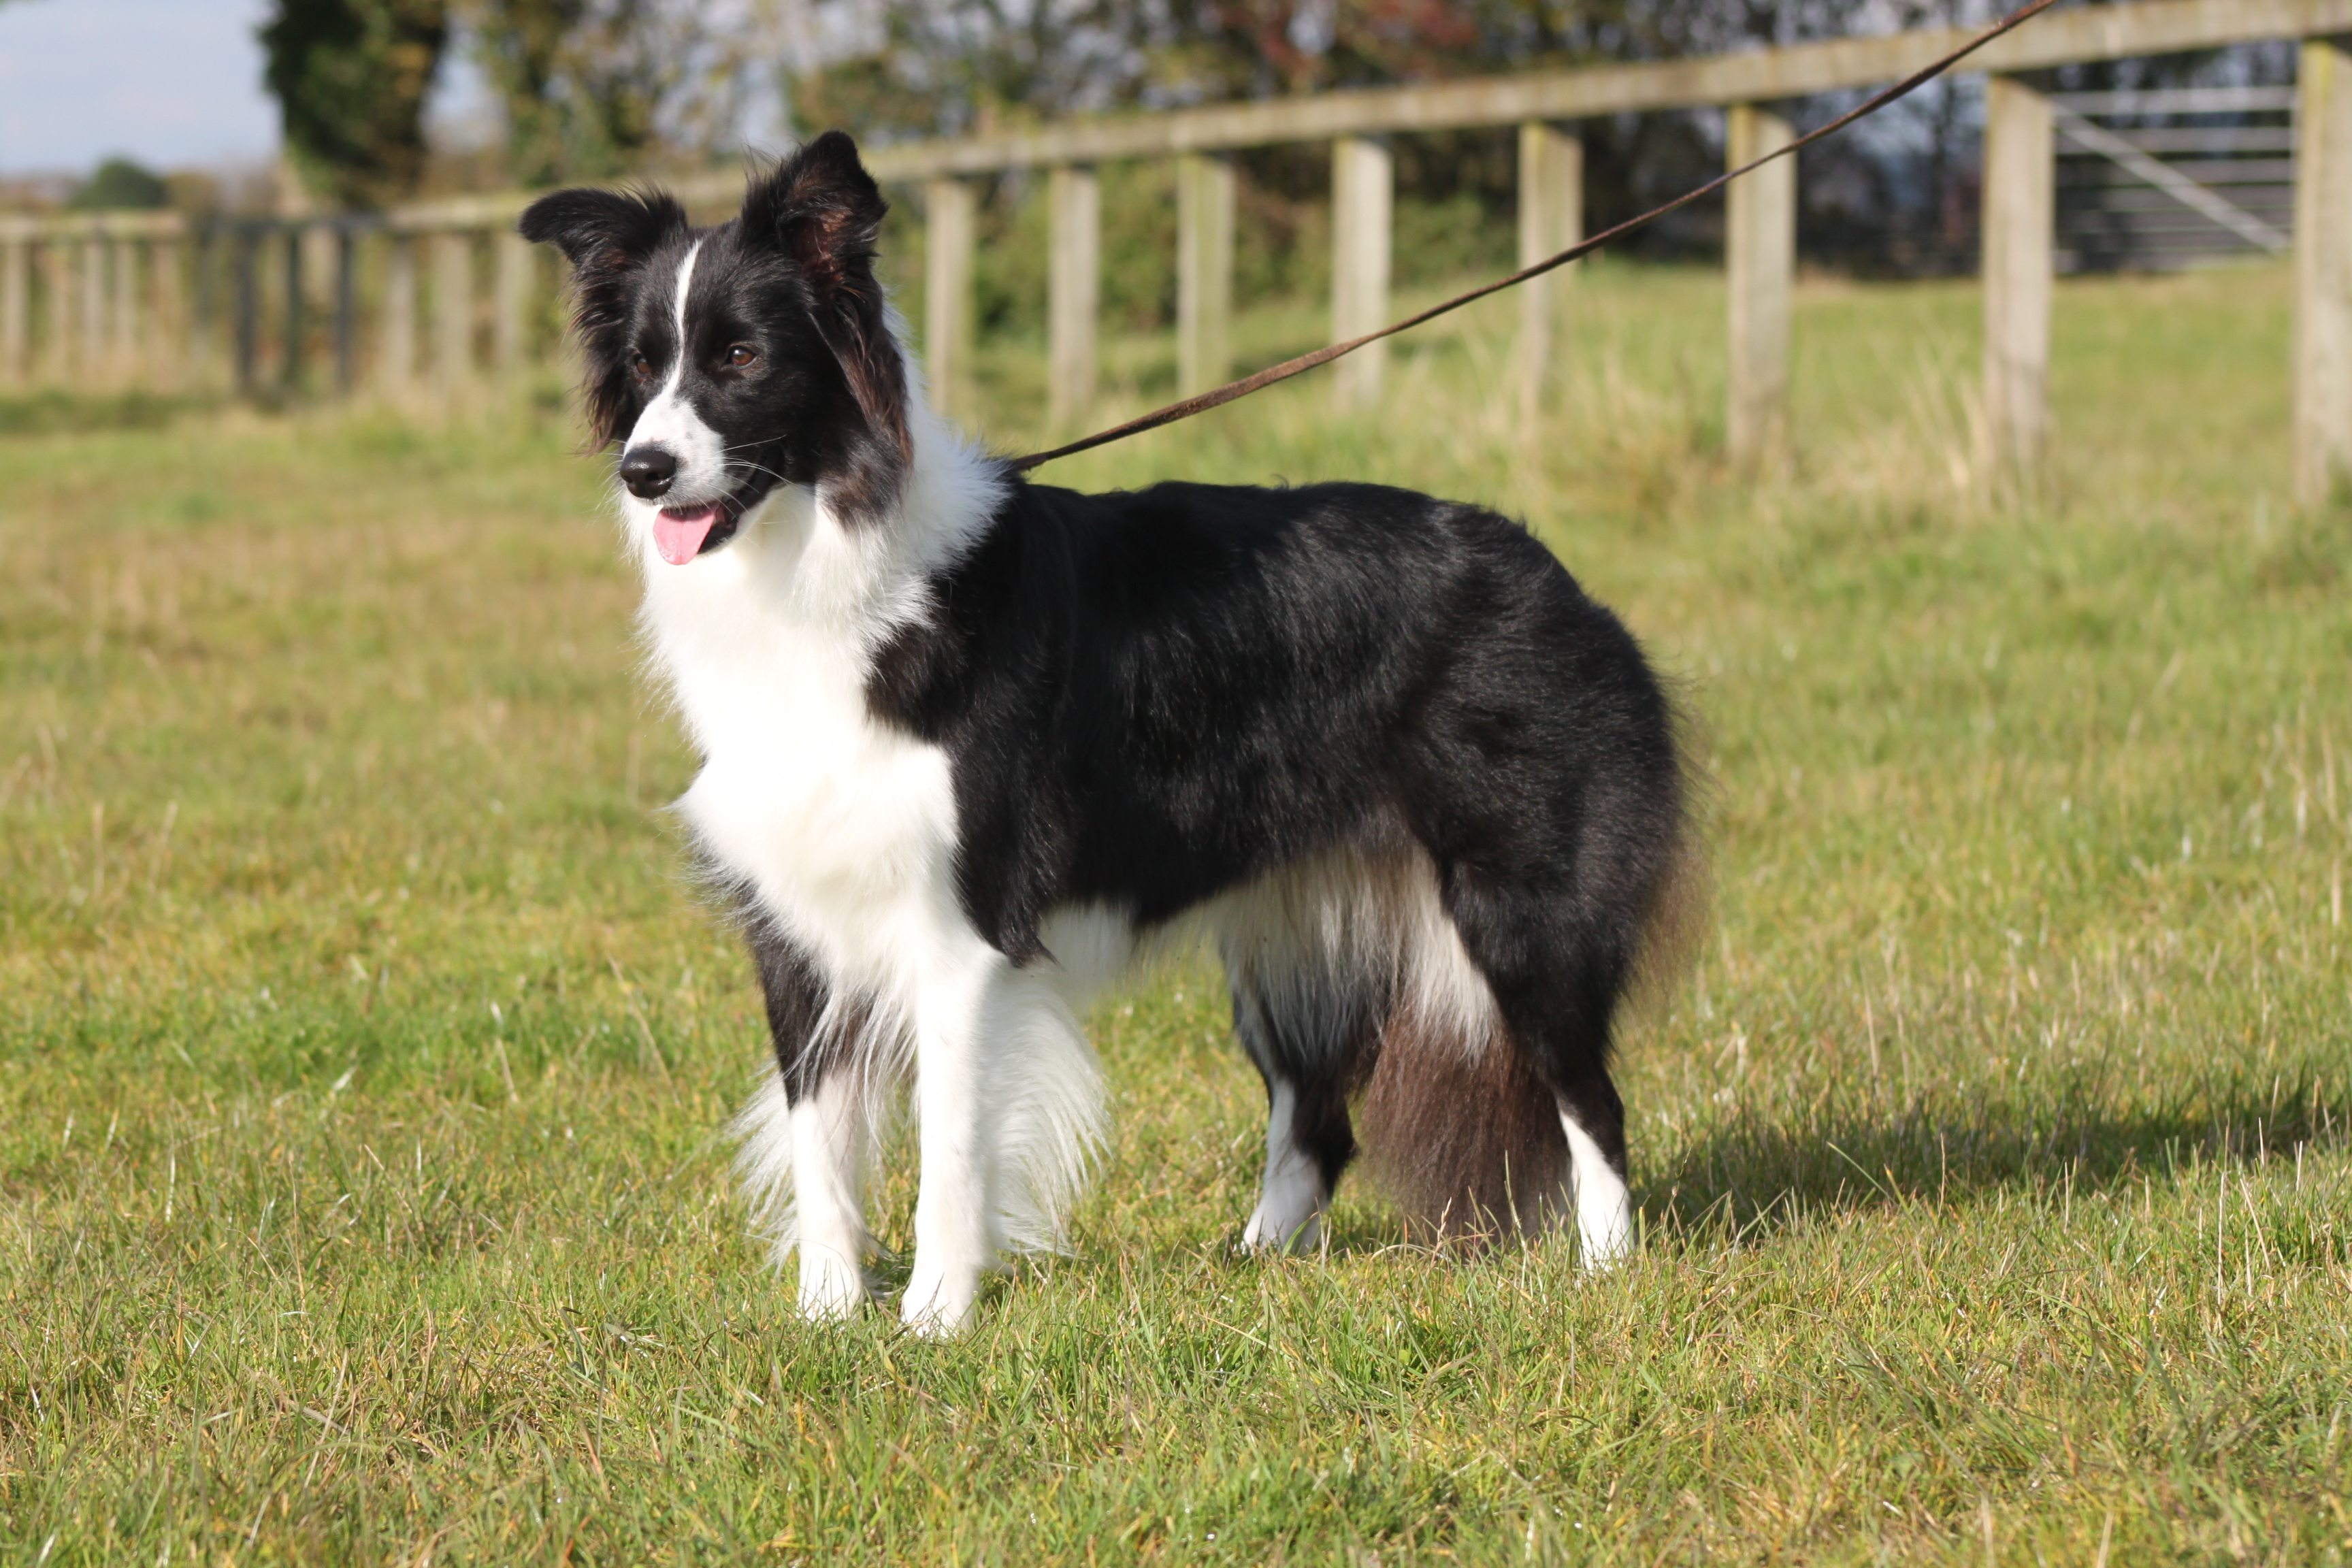 Animals___Dogs_Border_Collie_on_a_leash_